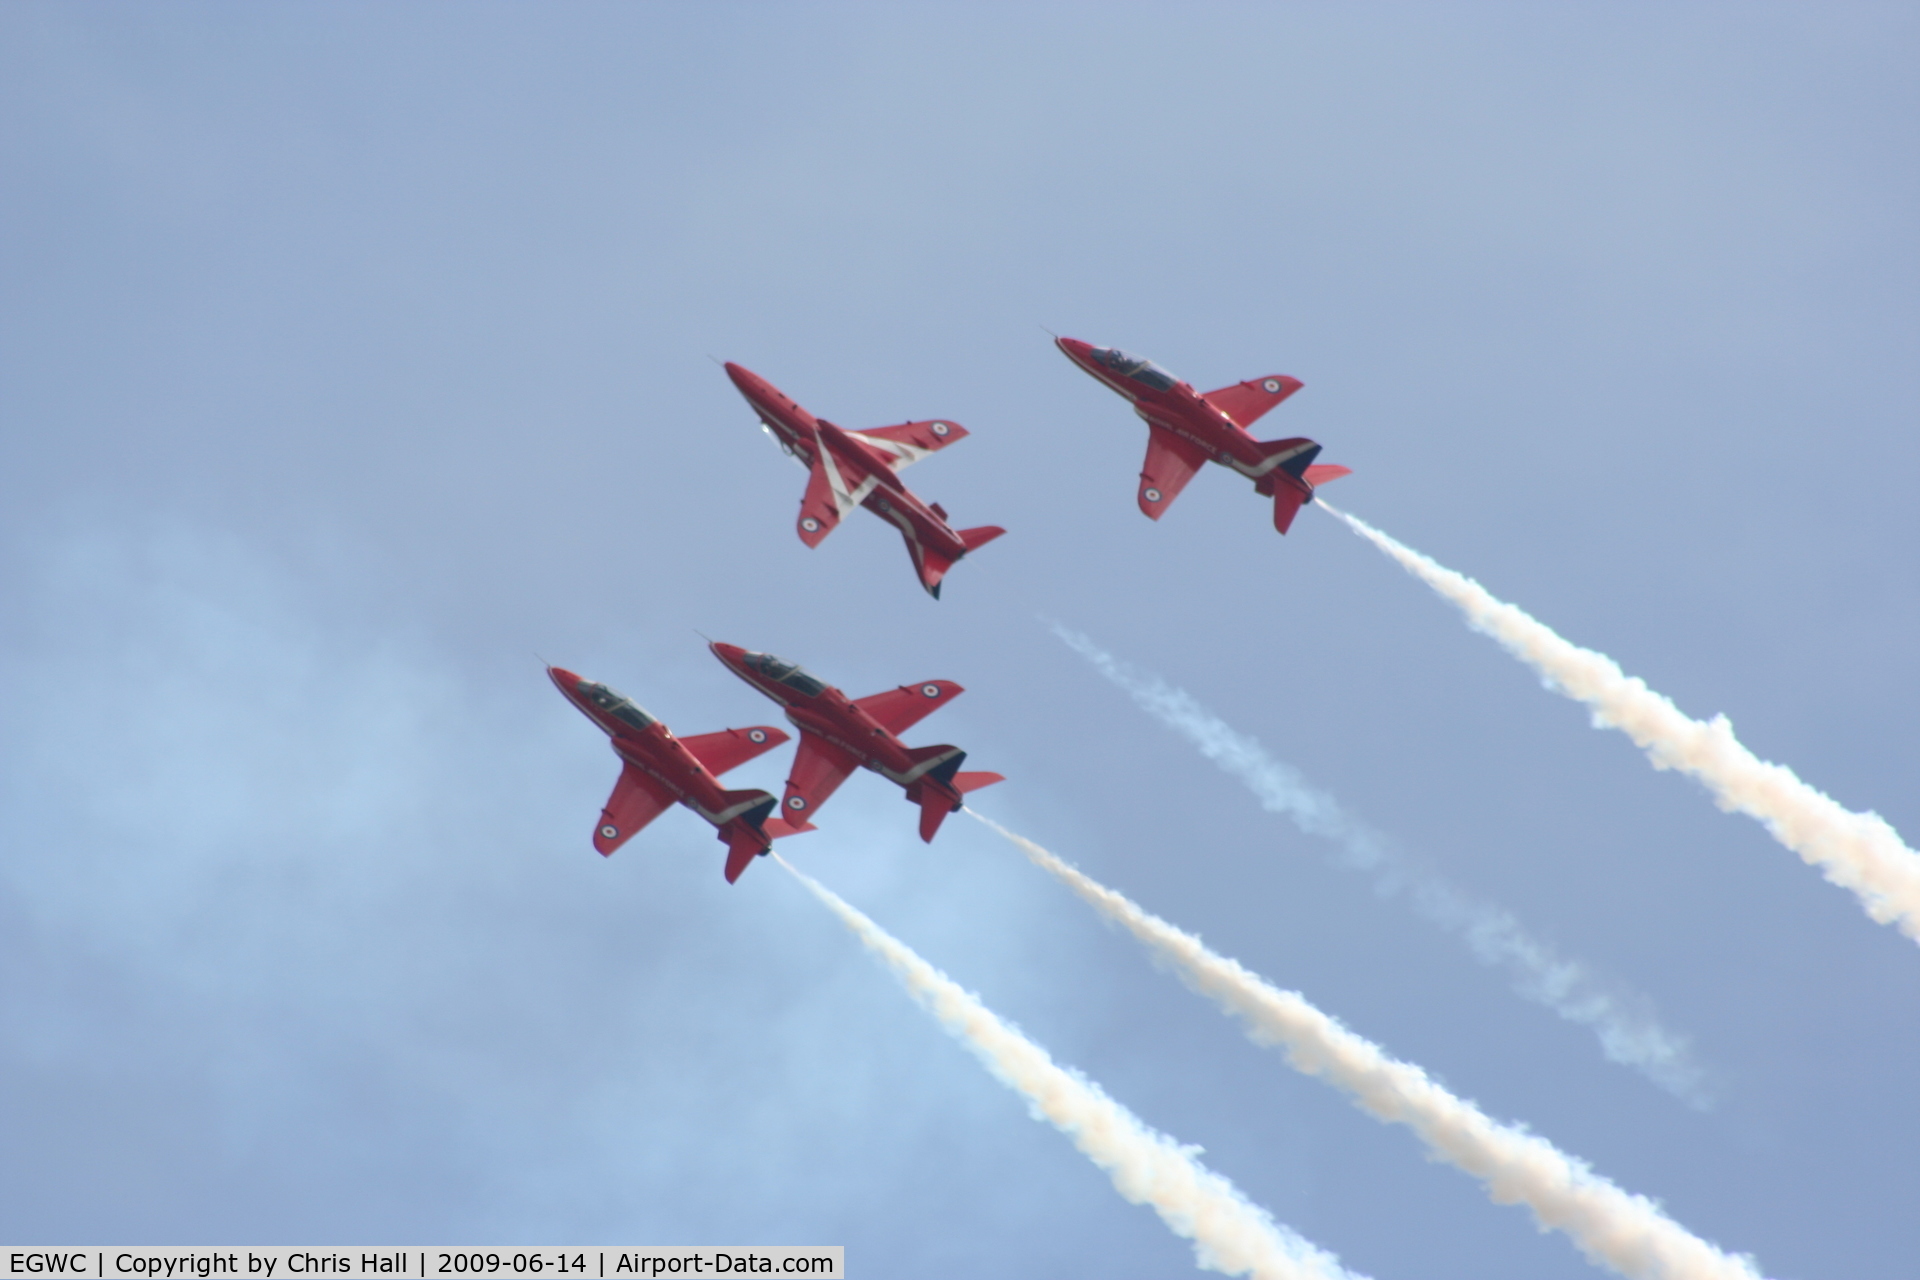 RAF Cosford Airport, Albrighton, England United Kingdom (EGWC) - Red Arrows displaying at the Cosford Airshow